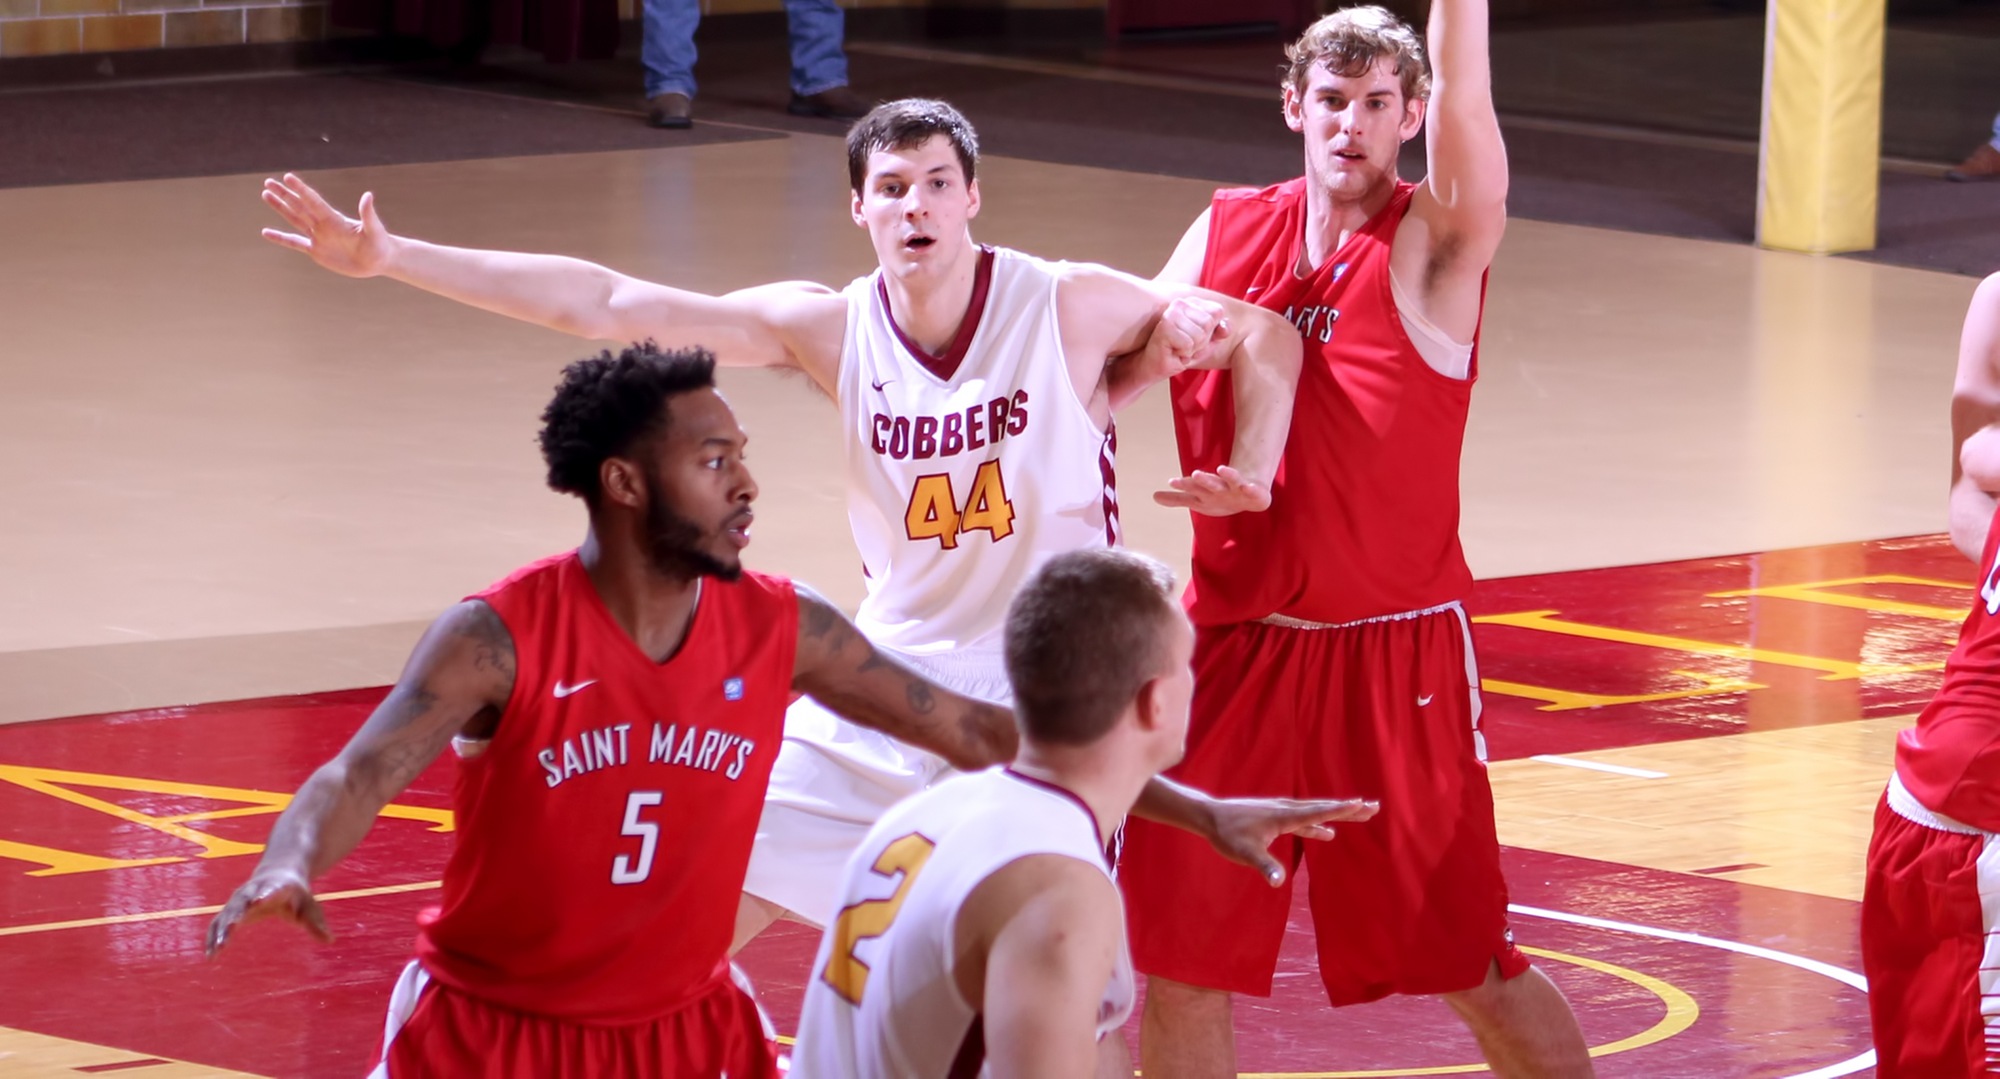 Senior Kevin Wolfe had a career-high 10 rebounds in the Cobbers' 67-64 win at St. Mary's.